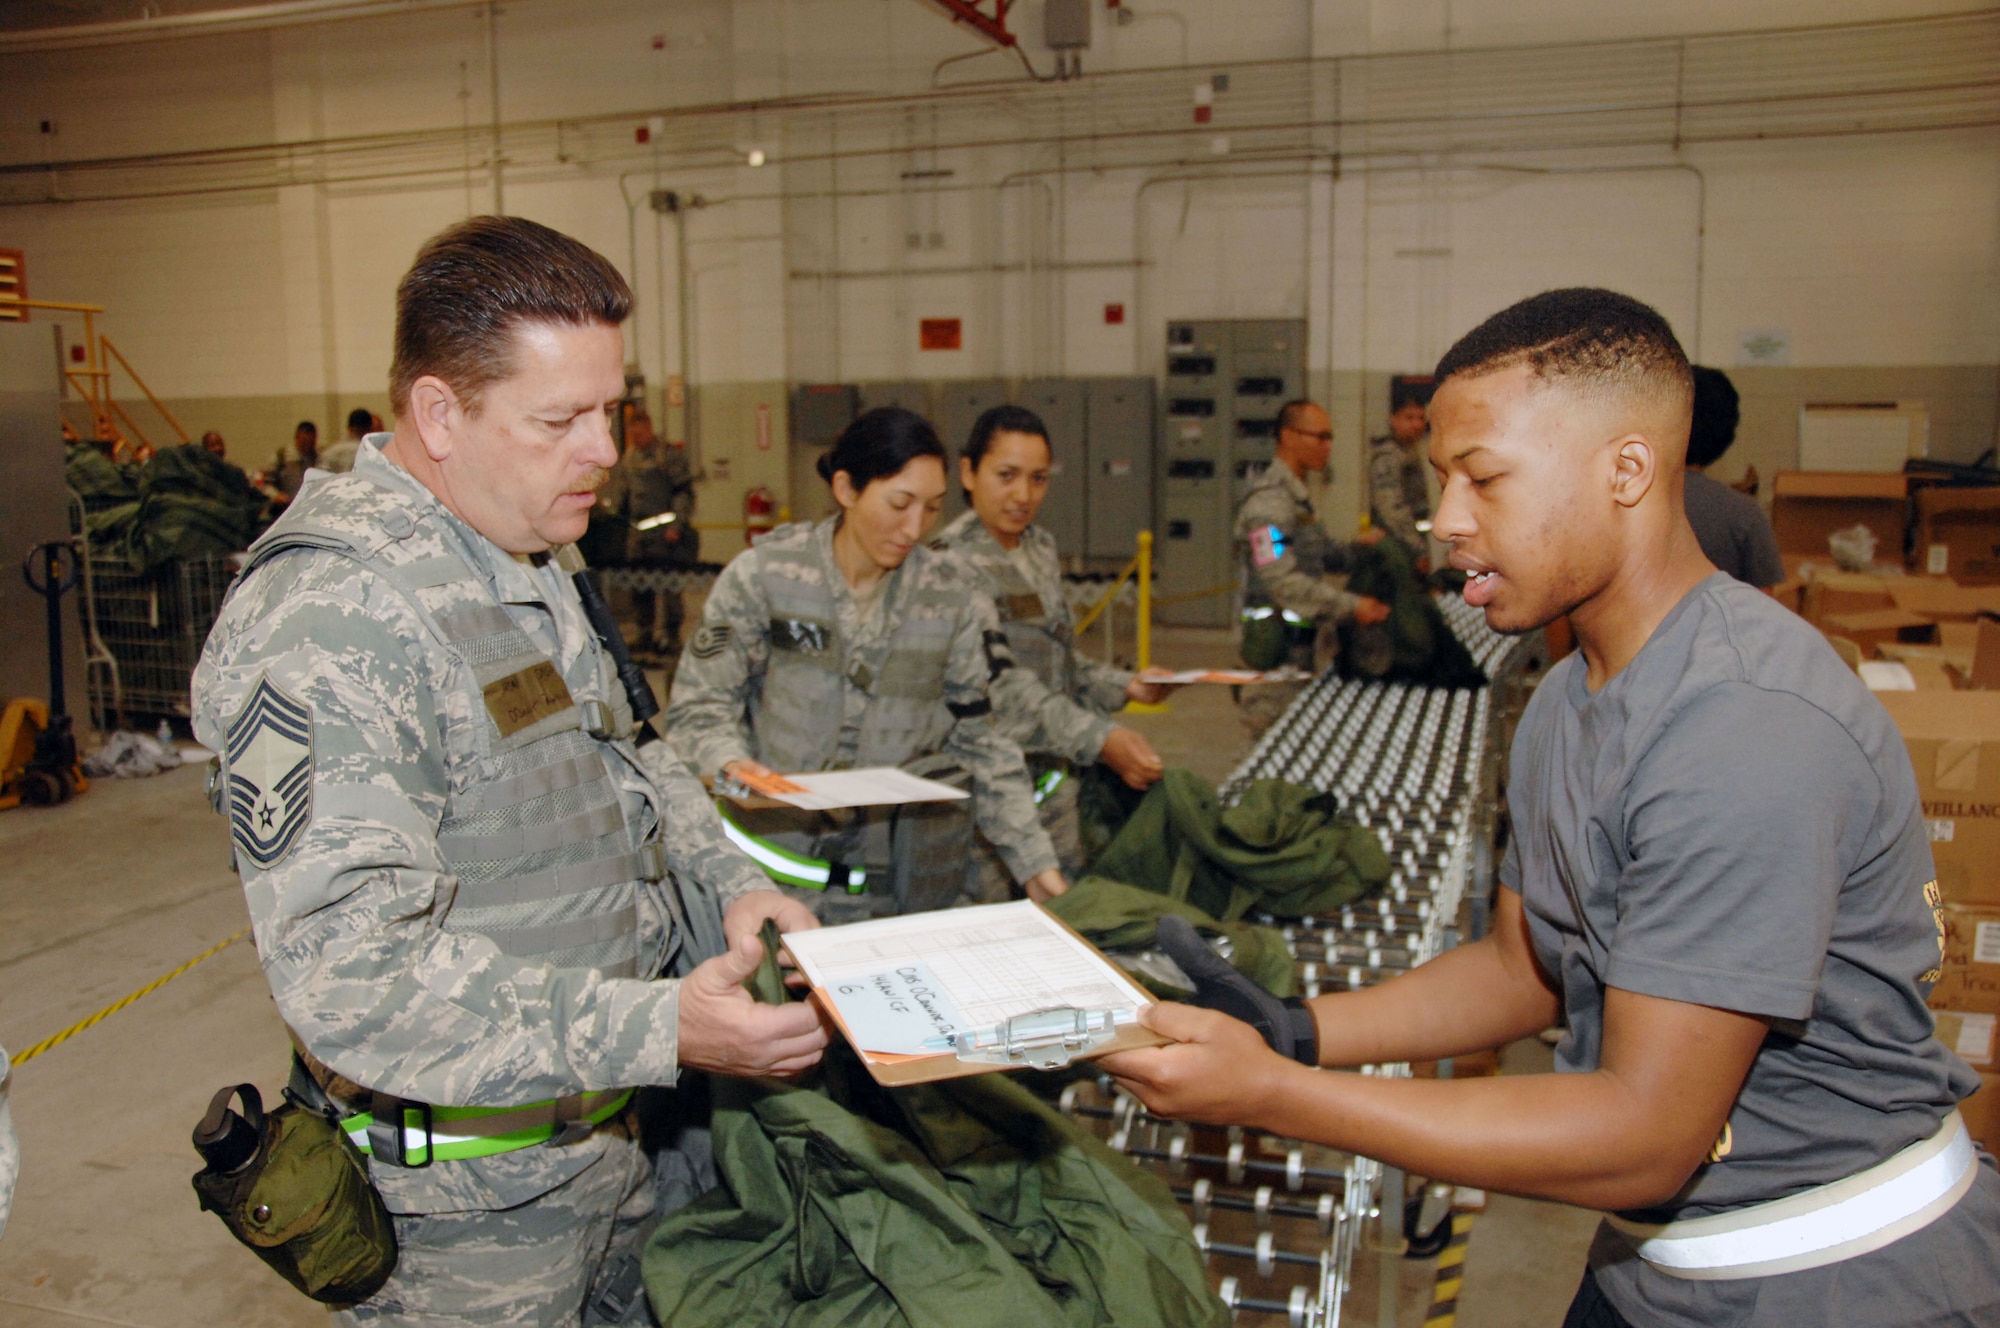 Jamil Montigue, a member of the 146th Airlift Wing's student flight, helps build Chief Master Sgt. Ron O' Conner's mobility bag during a prepare the force exercise for the upcoming ORI (Operational Readiness Inspection) at the 146th Airlift Wing located in Port Hueneme Calif, March 3, 2013. Montigue is scheduled to leave for military basic training May 6, 2013 and upon return will be joining the Logistics Readiness Squadron. (U.S. Air Force photo by: Senior Airman Nicholas Carzis)